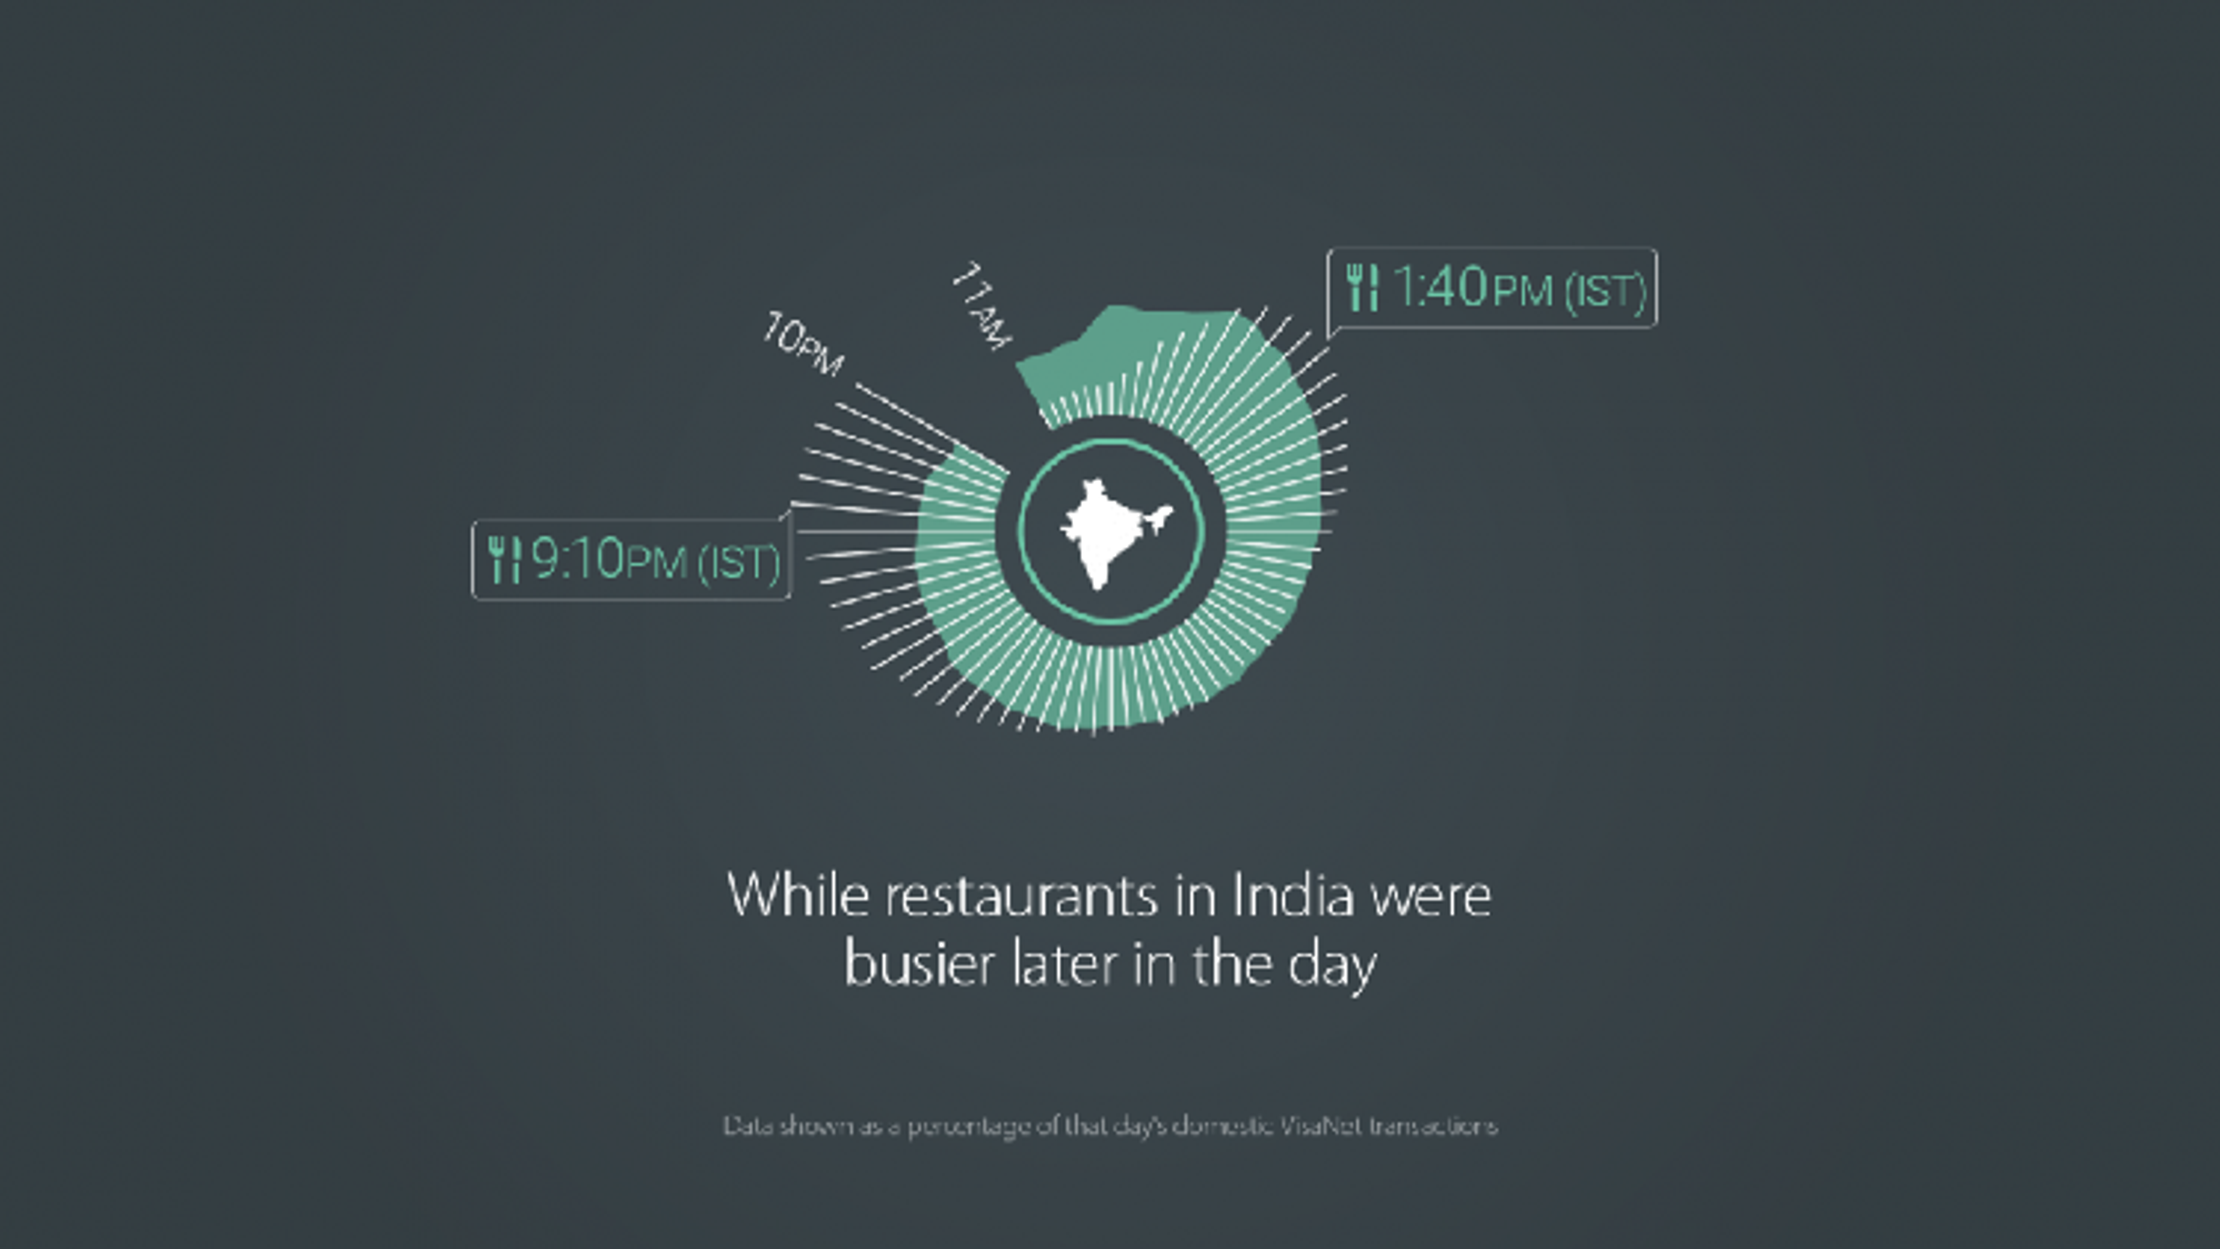 A radial histogram showing the number of Visa transactions for restaurants in India between 11PM and 10AM.